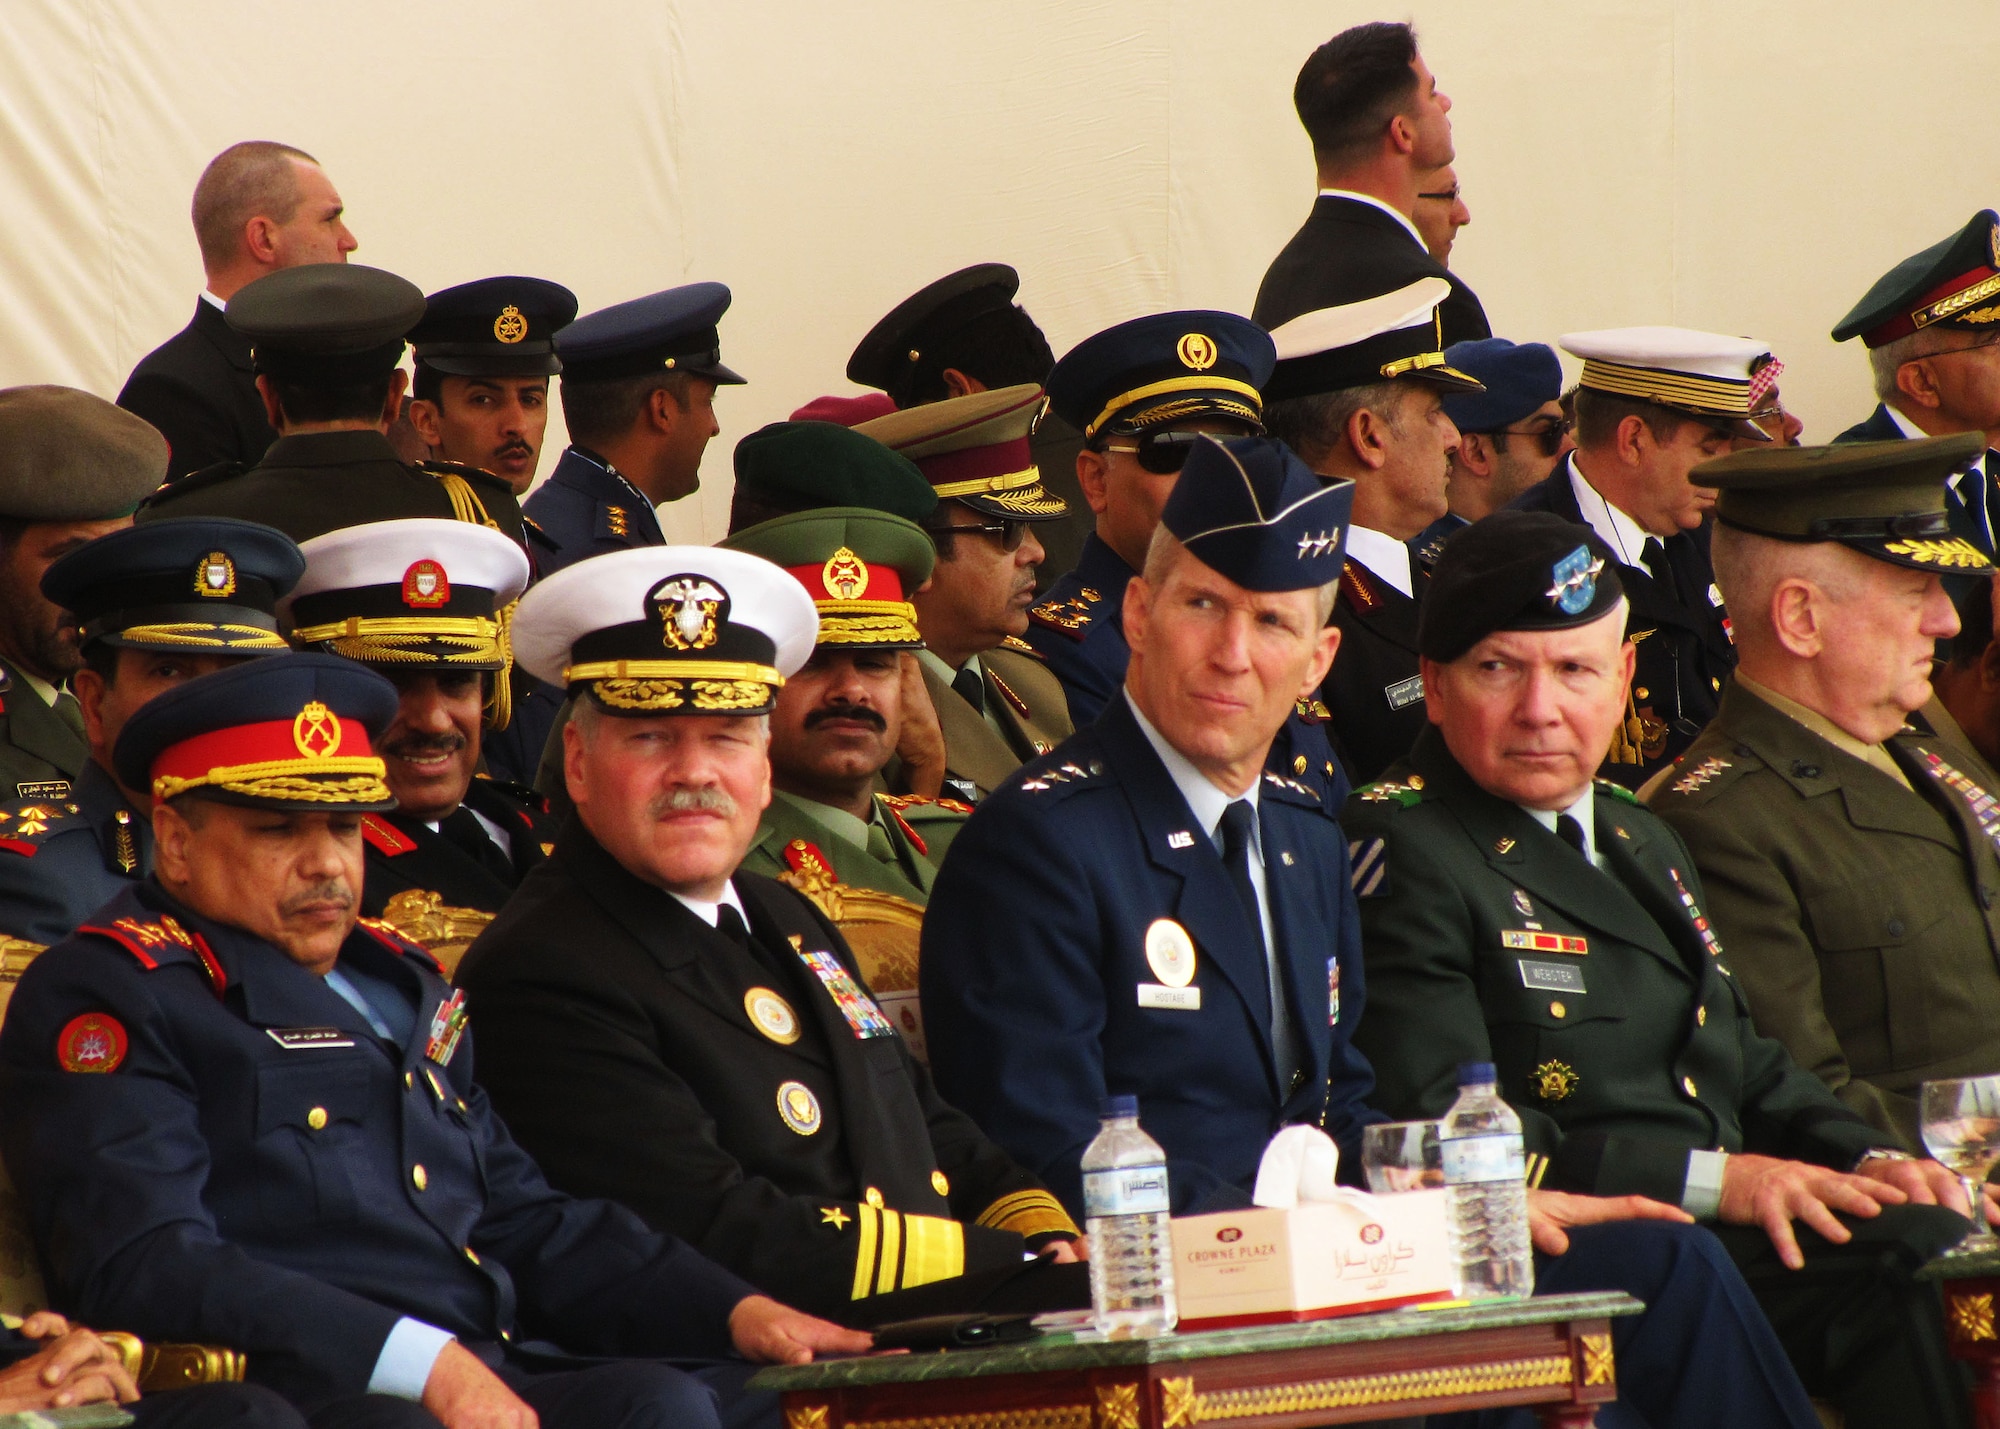 Lt. Gen. Michael Hostage III, commander of the U.S. Air Forces Central Command in Southwest Asia, (third from left) sits among some of the world's leaders and top dignitaries during Kuwait's 50/20 Celebration. Kuwait celebrated their 50th year of independence from Great Britain and 20th year of liberation from Saddam Hussein’s invading forces with several coalition countries, including the U.S., by staging a very large military parade, Feb. 26. Numerous aircraft flew over the parade grounds to kick off the two-hour long parade, which included tanks, rocket launchers, multi-barrelled guns, and military formations of servicemembers from countries, such as Kuwait, the U.S., U.K., France, Saudi Arabia, Syria, and Qatar. (U.S. Air Force photo by Staff Sgt. Angelique N. Smythe)